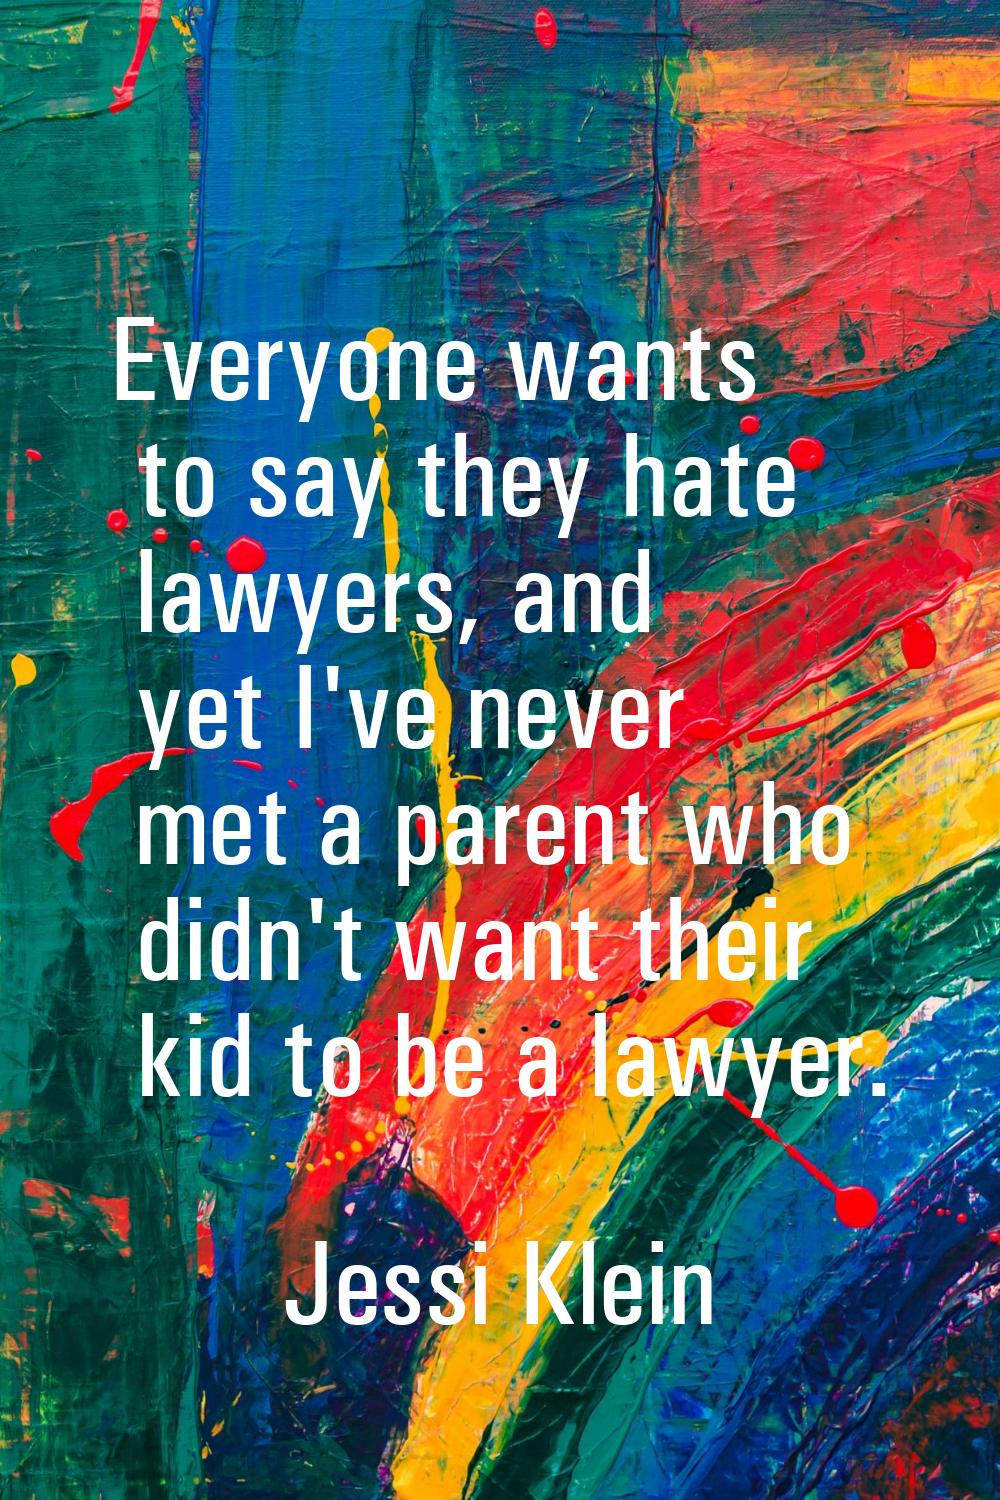 Everyone wants to say they hate lawyers, and yet I've never met a parent who didn't want their kid 